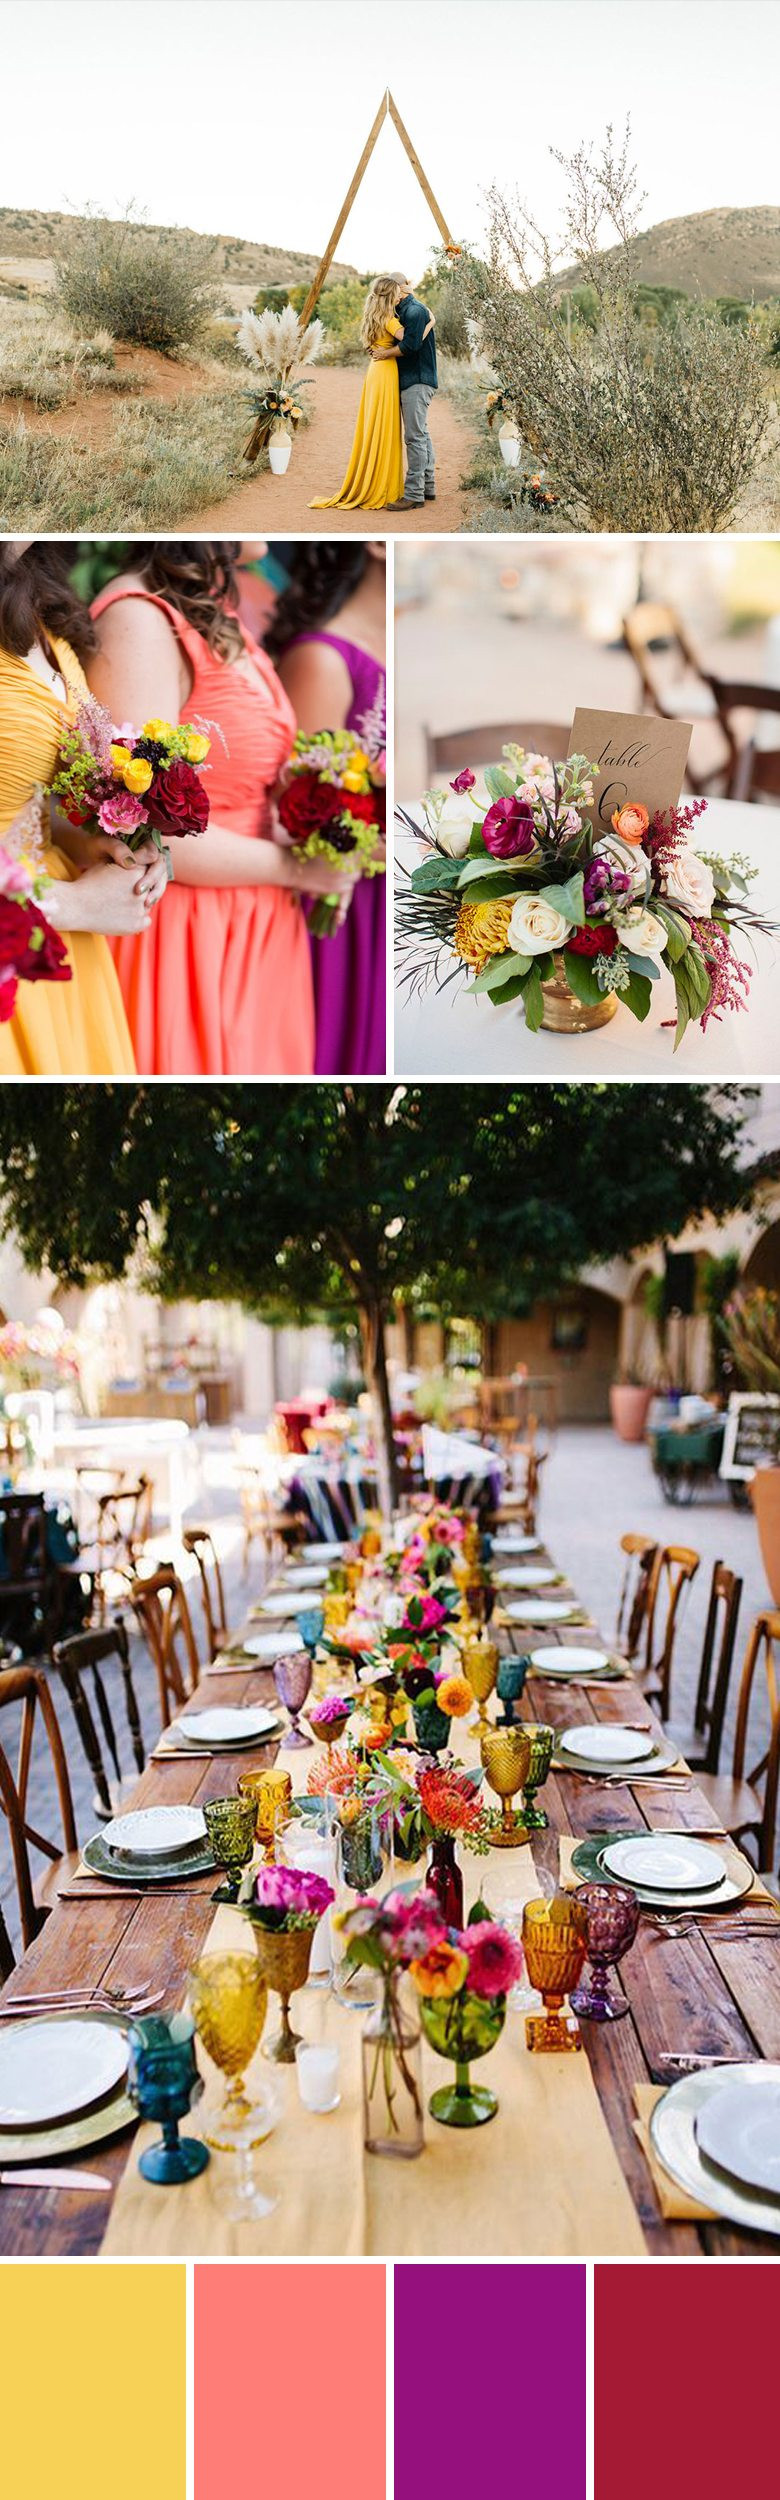 How To Pick Wedding Colors
 What You Need to Know to Choose Your Wedding Colors